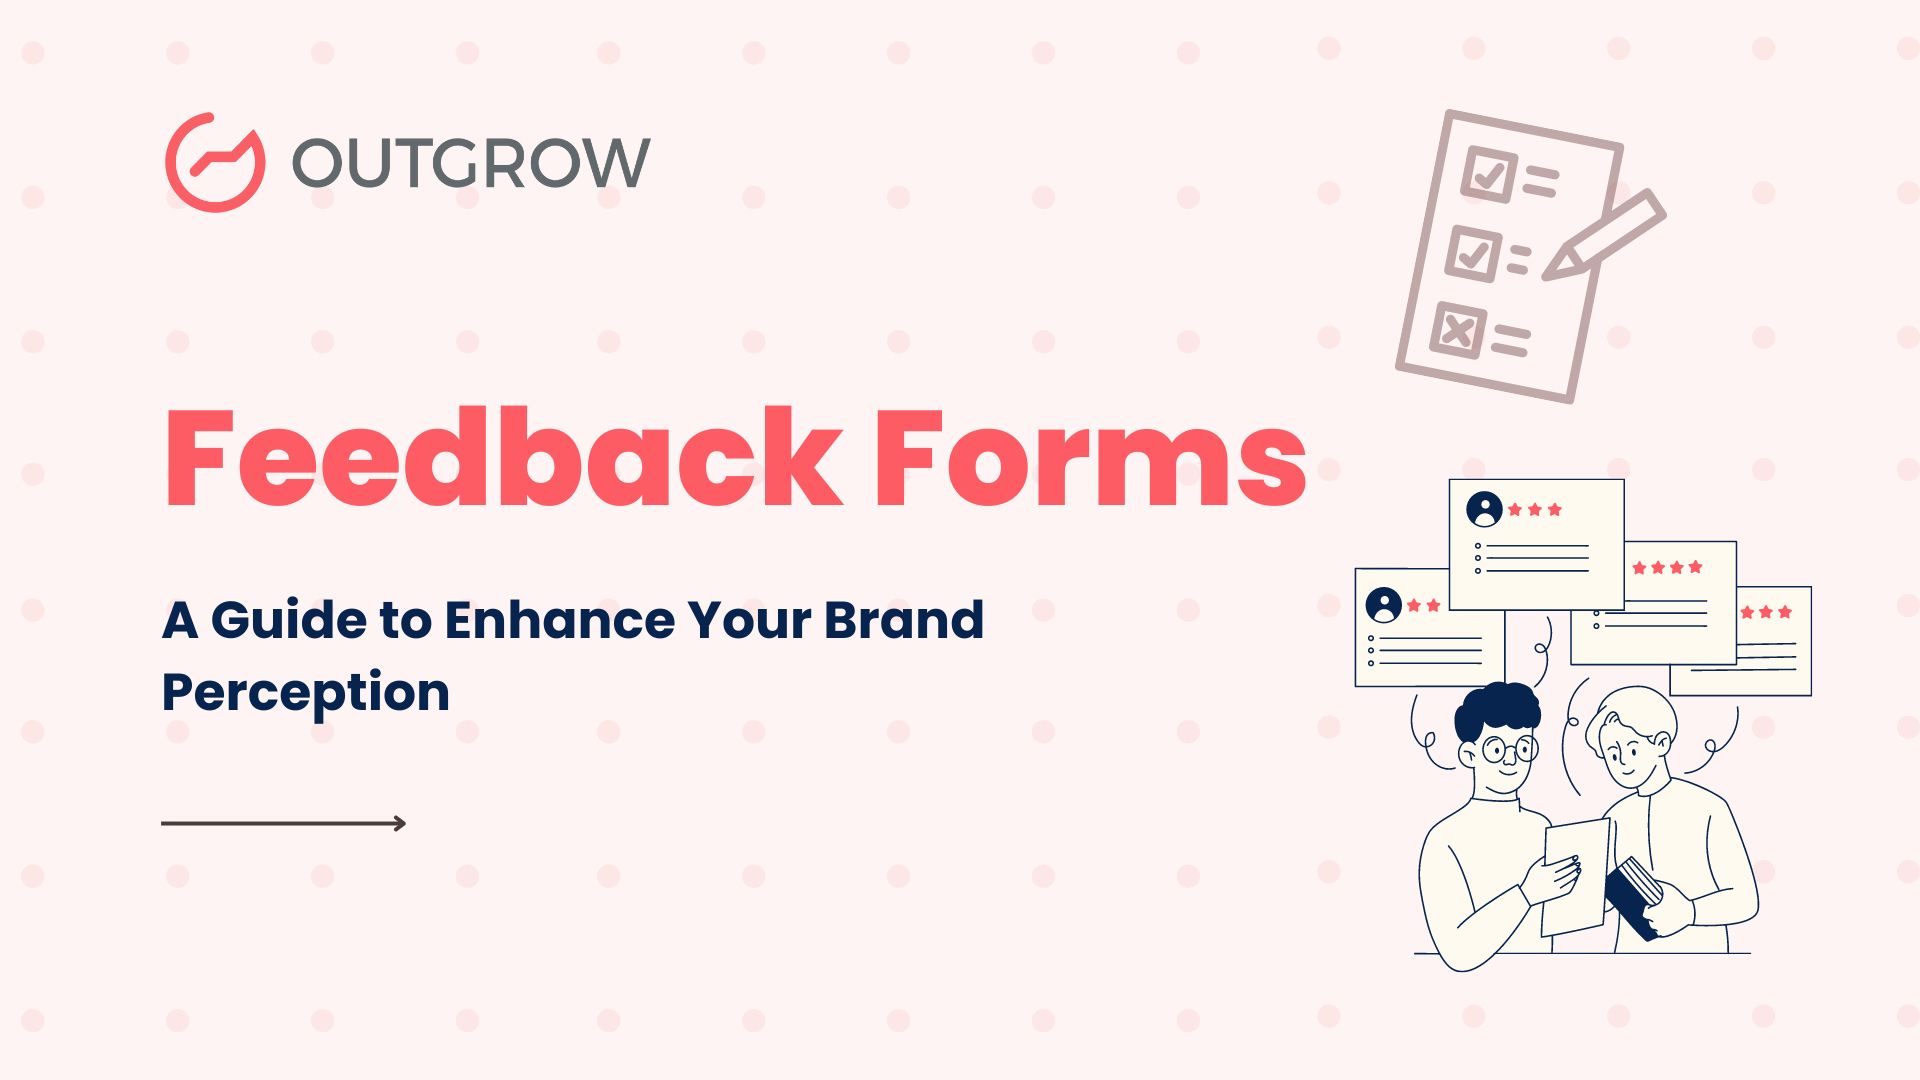 Feedback Forms: A Guide to Enhance Your Brand Perception